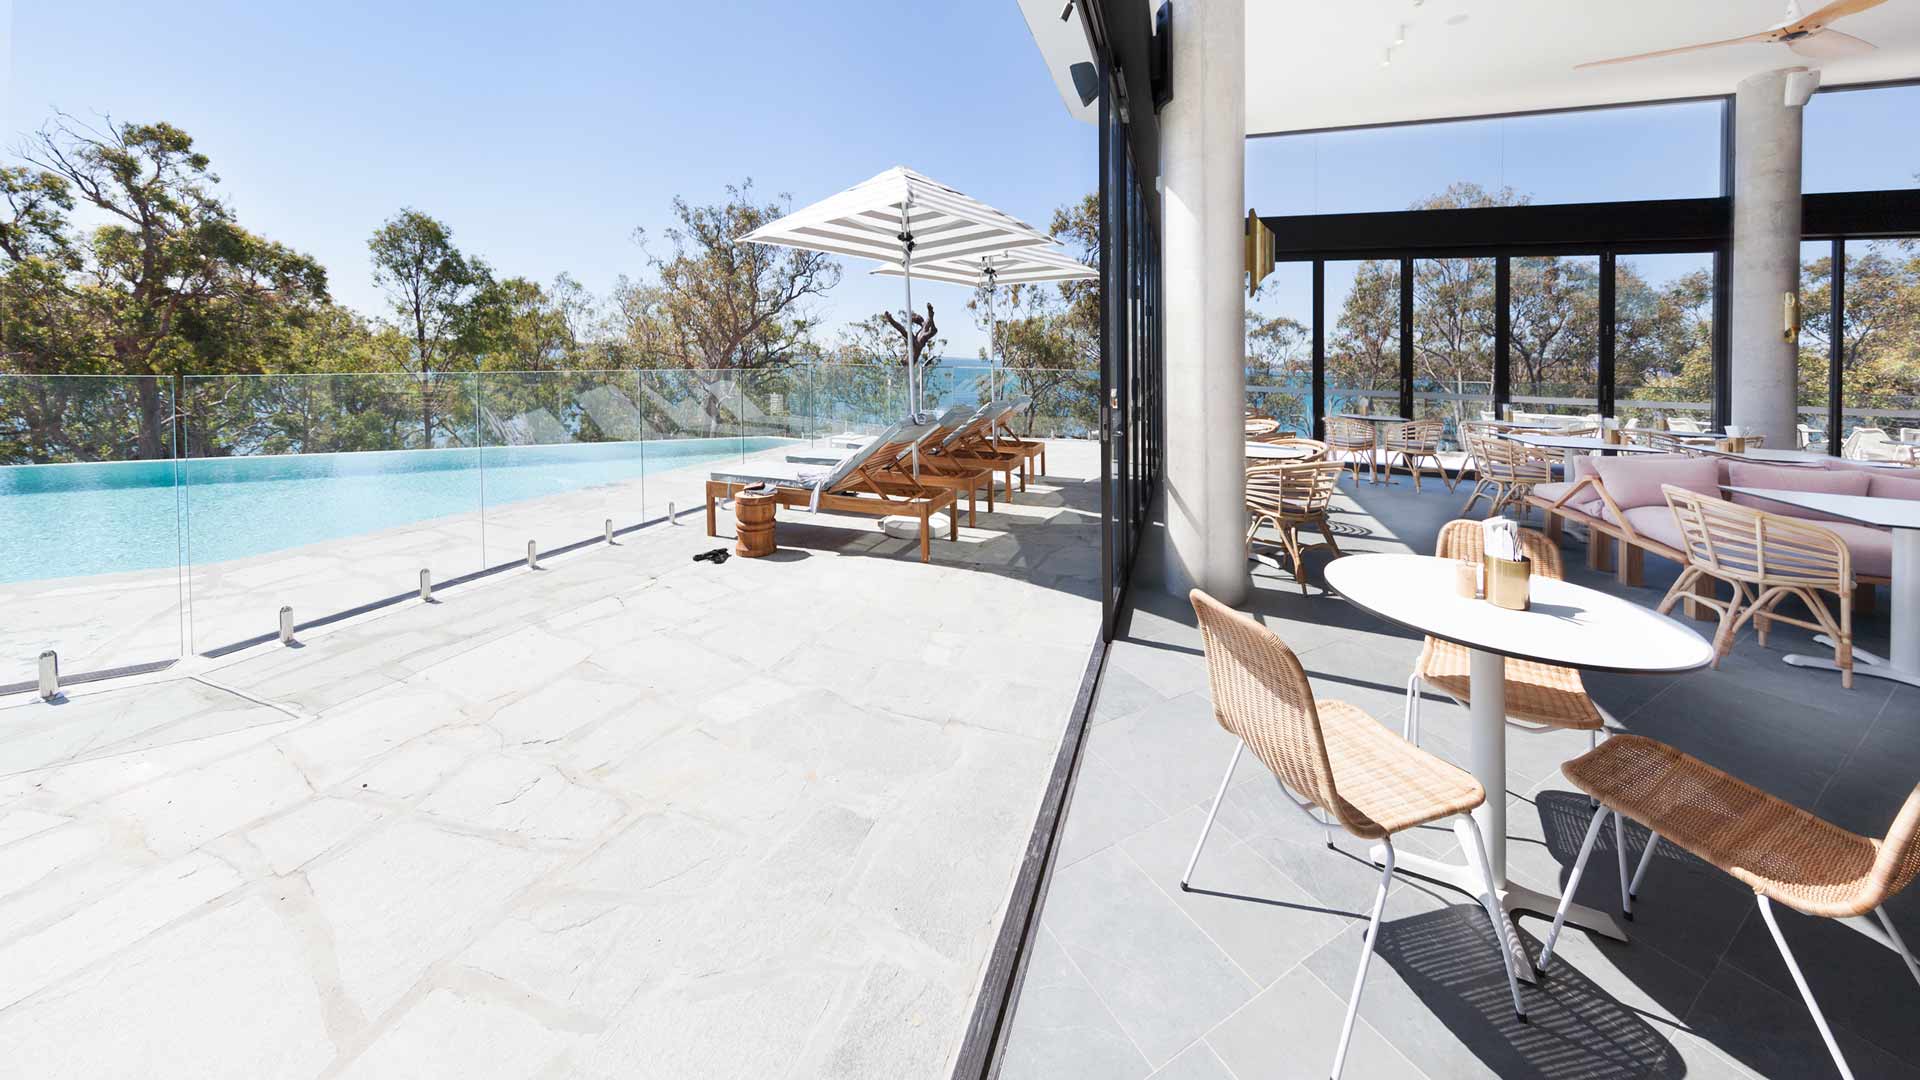 Bannisters Is Port Stephens' Luxe New Waterfront Hotel with an Infinity Pool